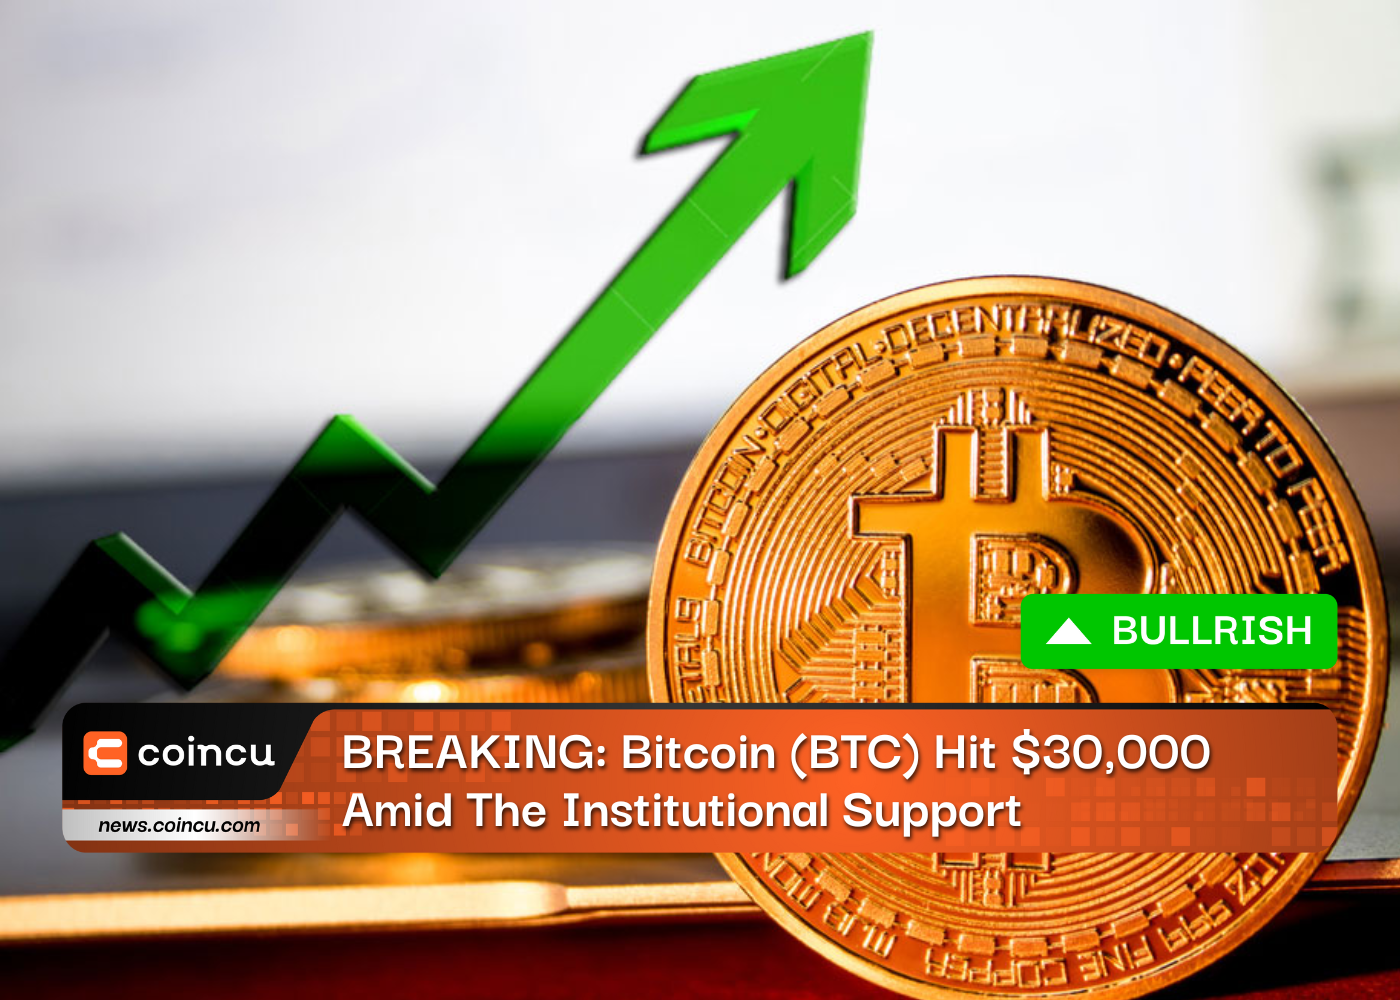 BREAKING: Bitcoin (BTC) Hit $30,000 Amid The Institutional Support